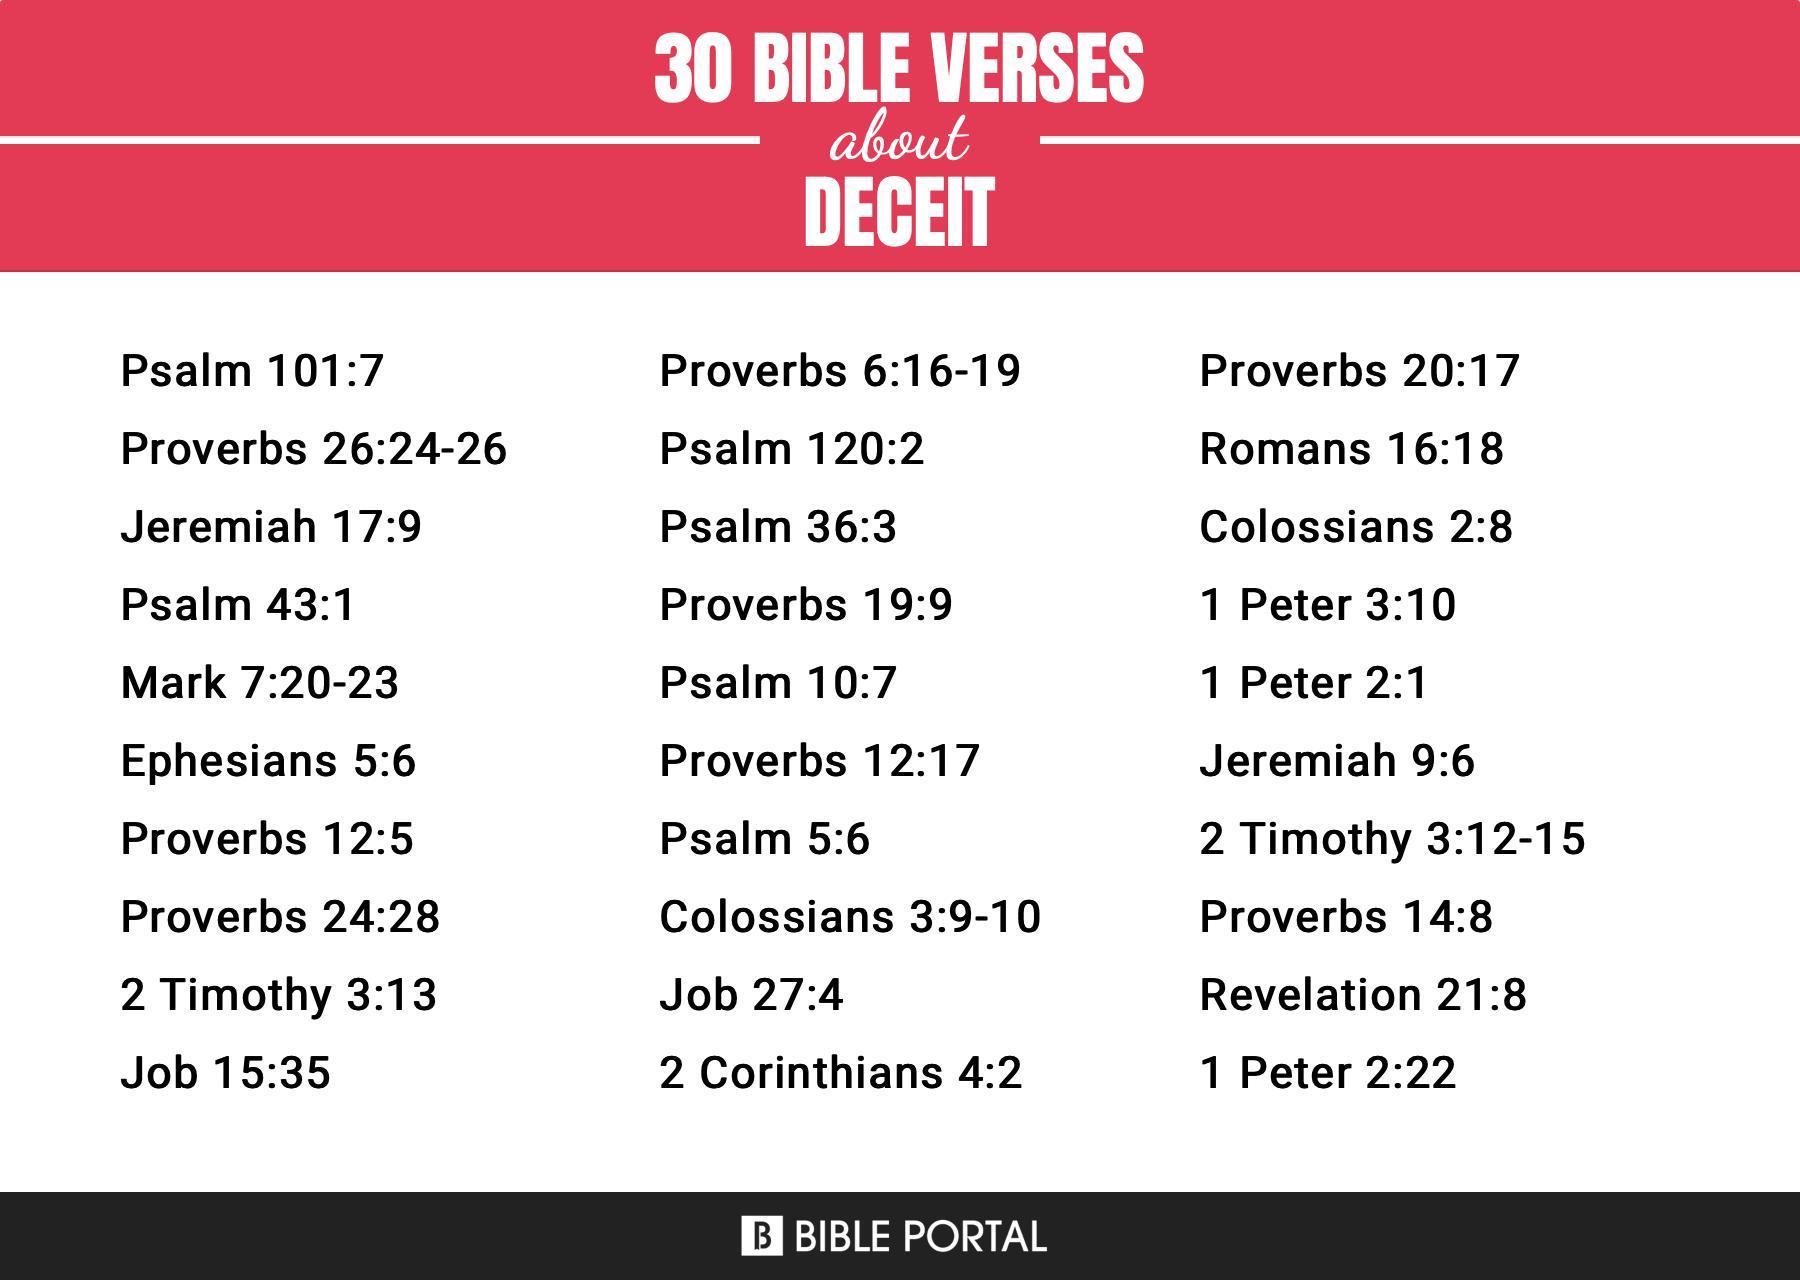 What Does the Bible Say about Deceit?